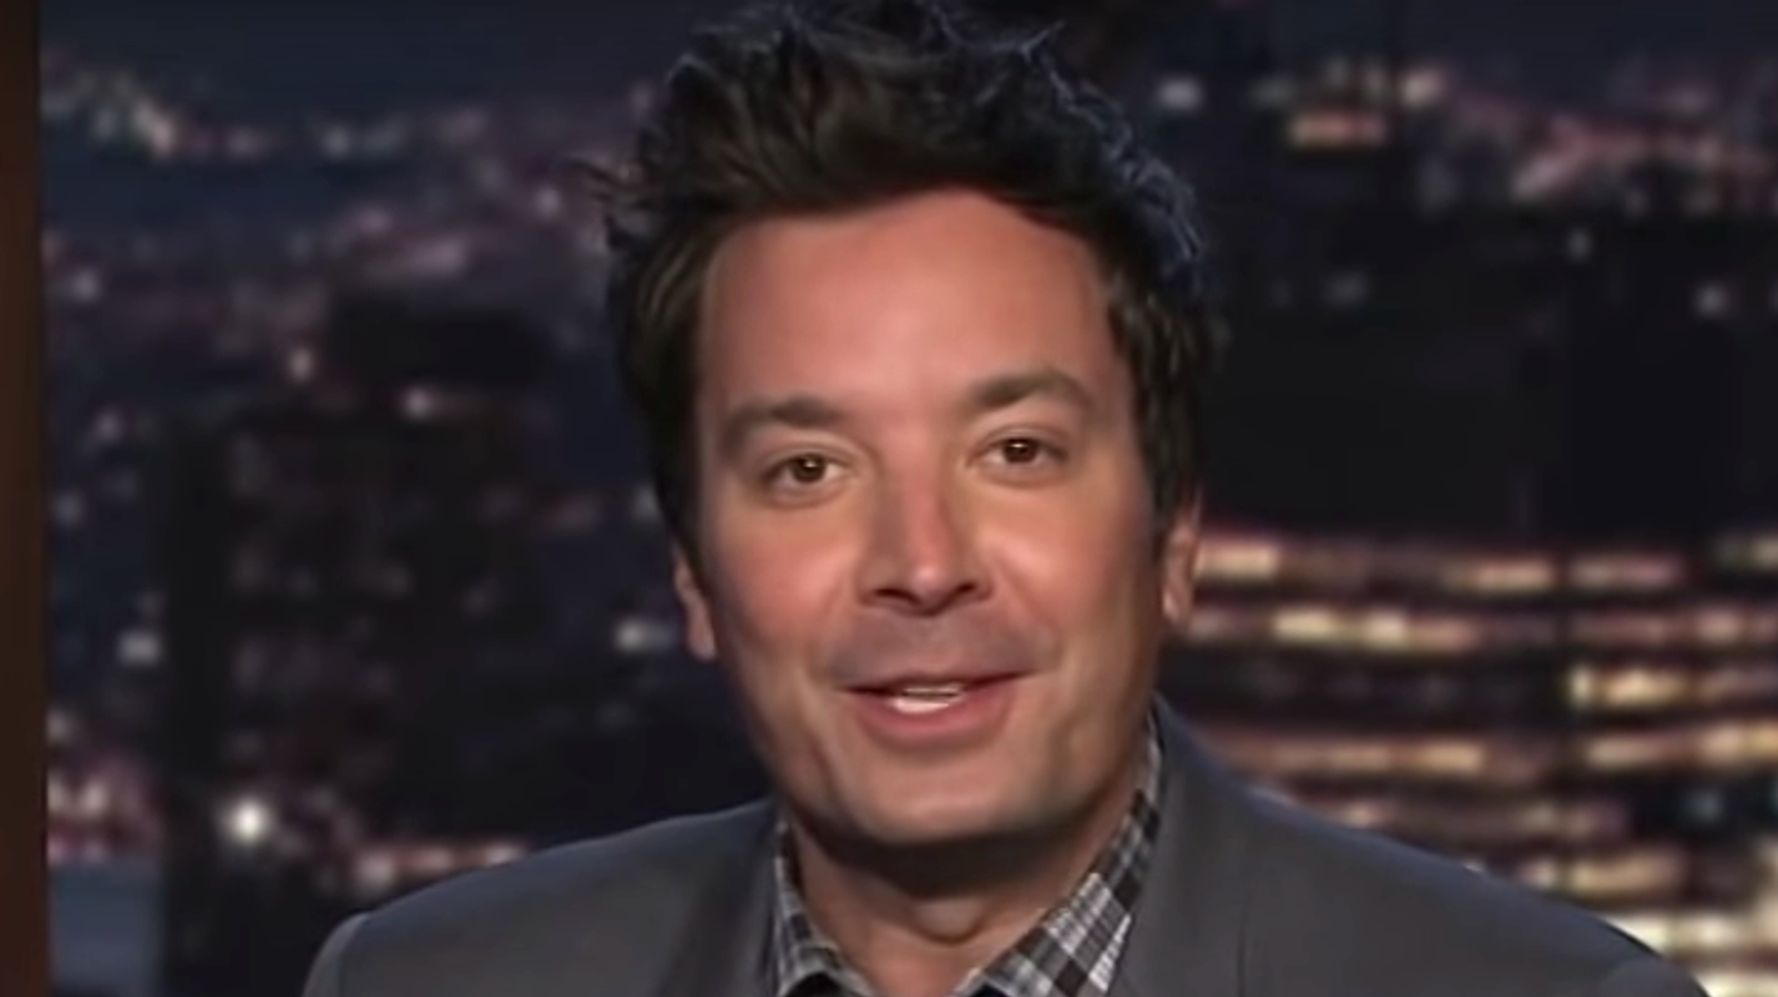 Jimmy Fallon Spots The Utterly Unsurprising Contradiction In Trump’s Election Playbook